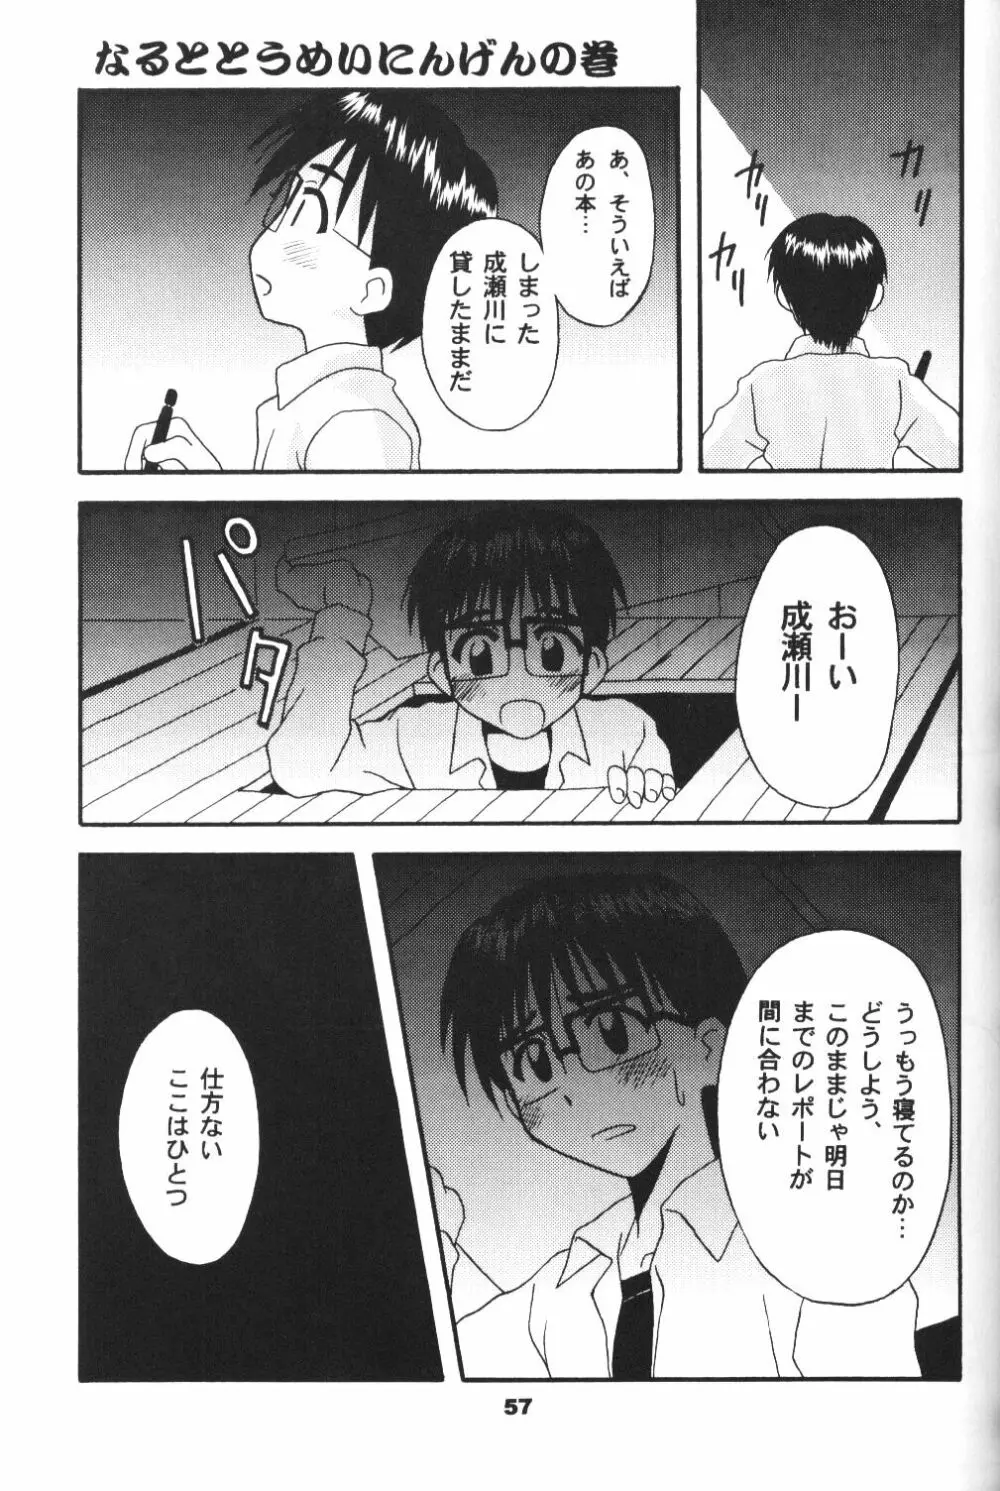 save Page.56